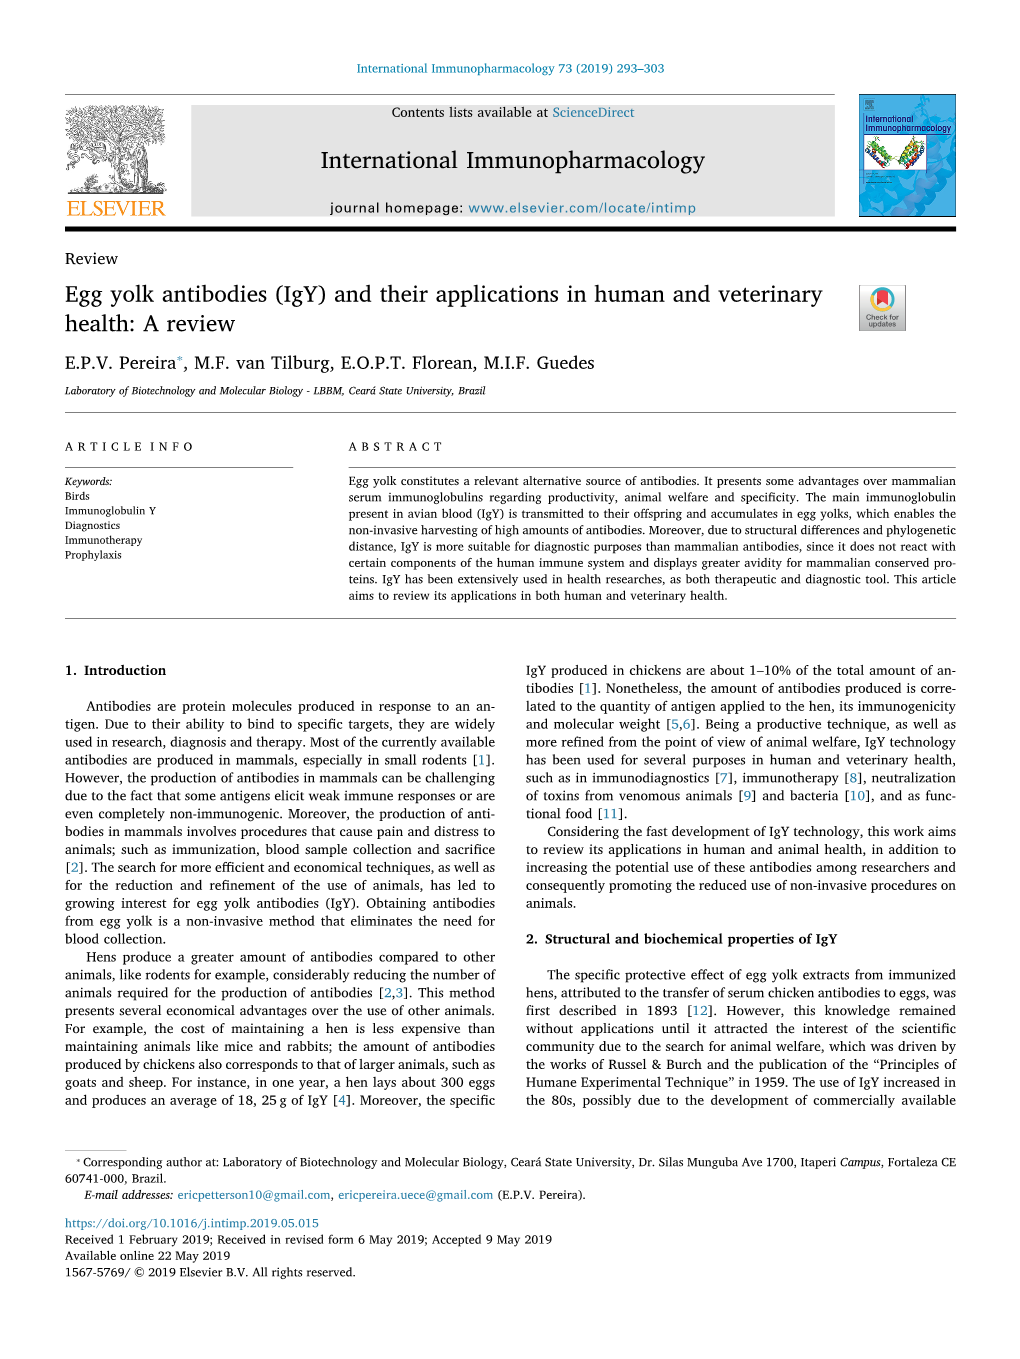 Egg Yolk Antibodies (Igy) and Their Applications in Human and Veterinary Health: a Review T ⁎ E.P.V